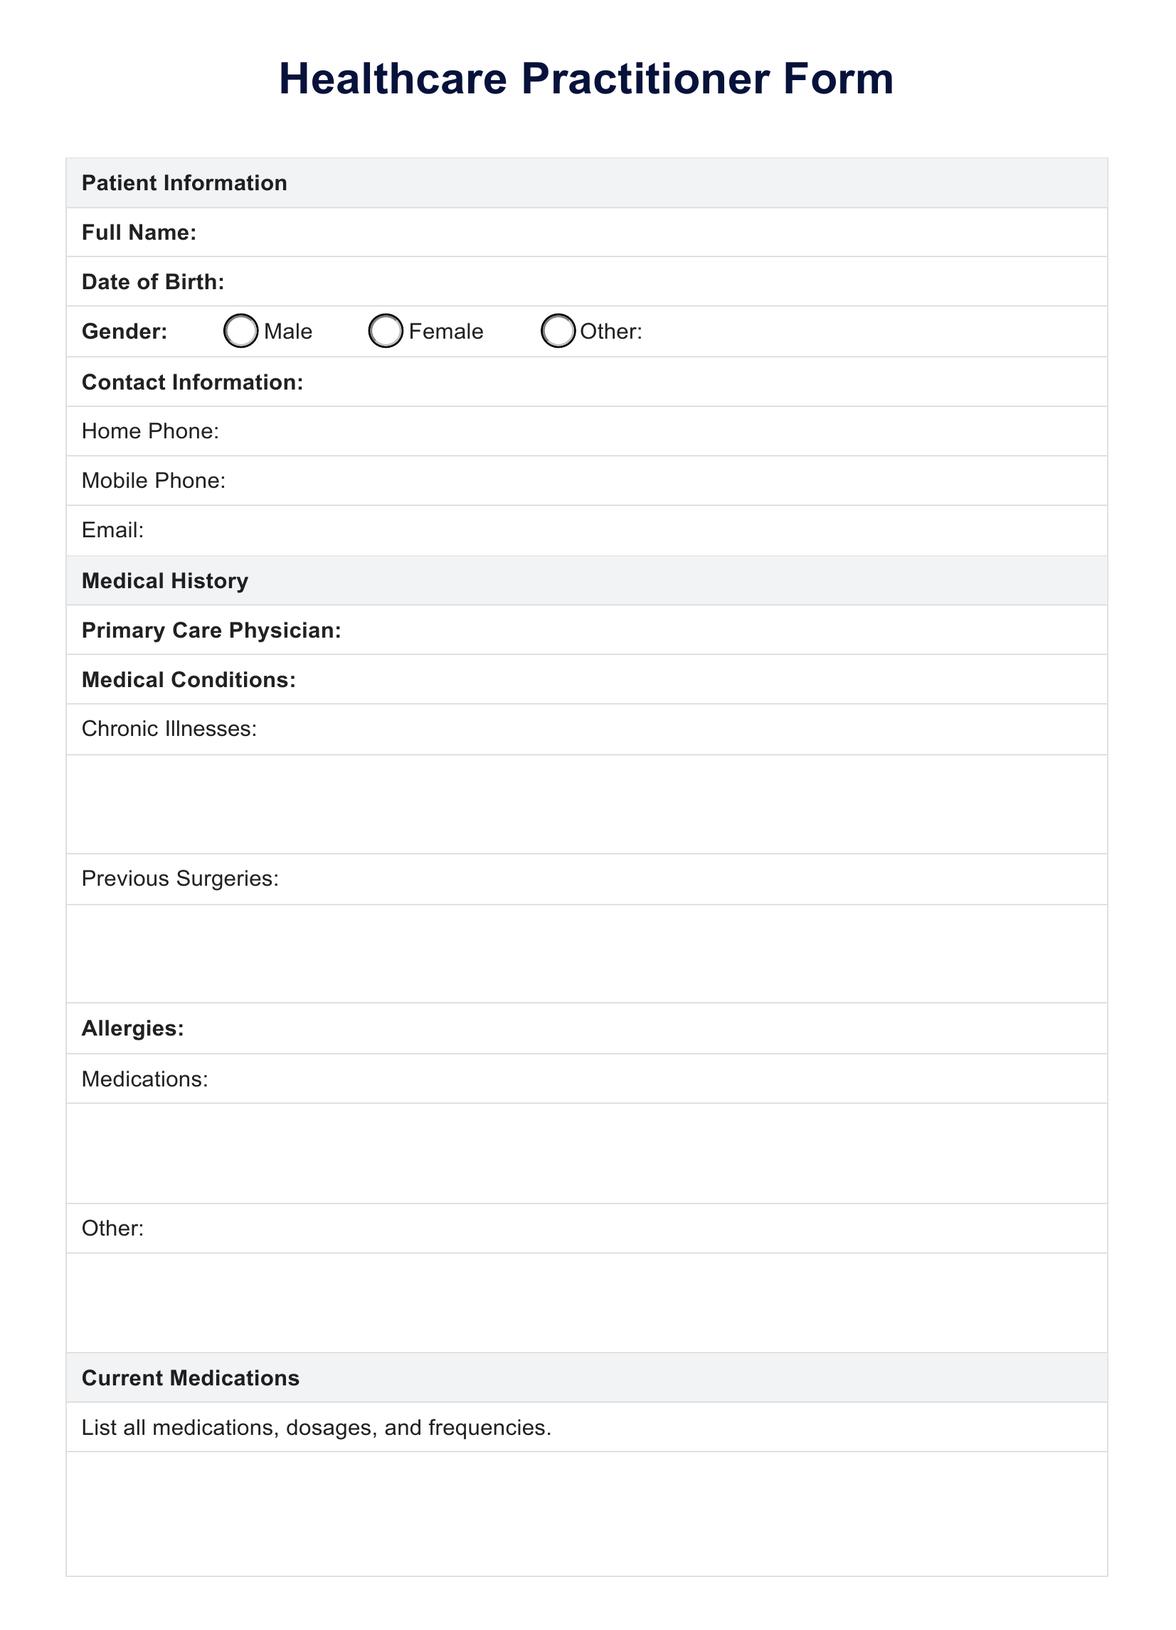 Healthcare Practitioner Form PDF Example